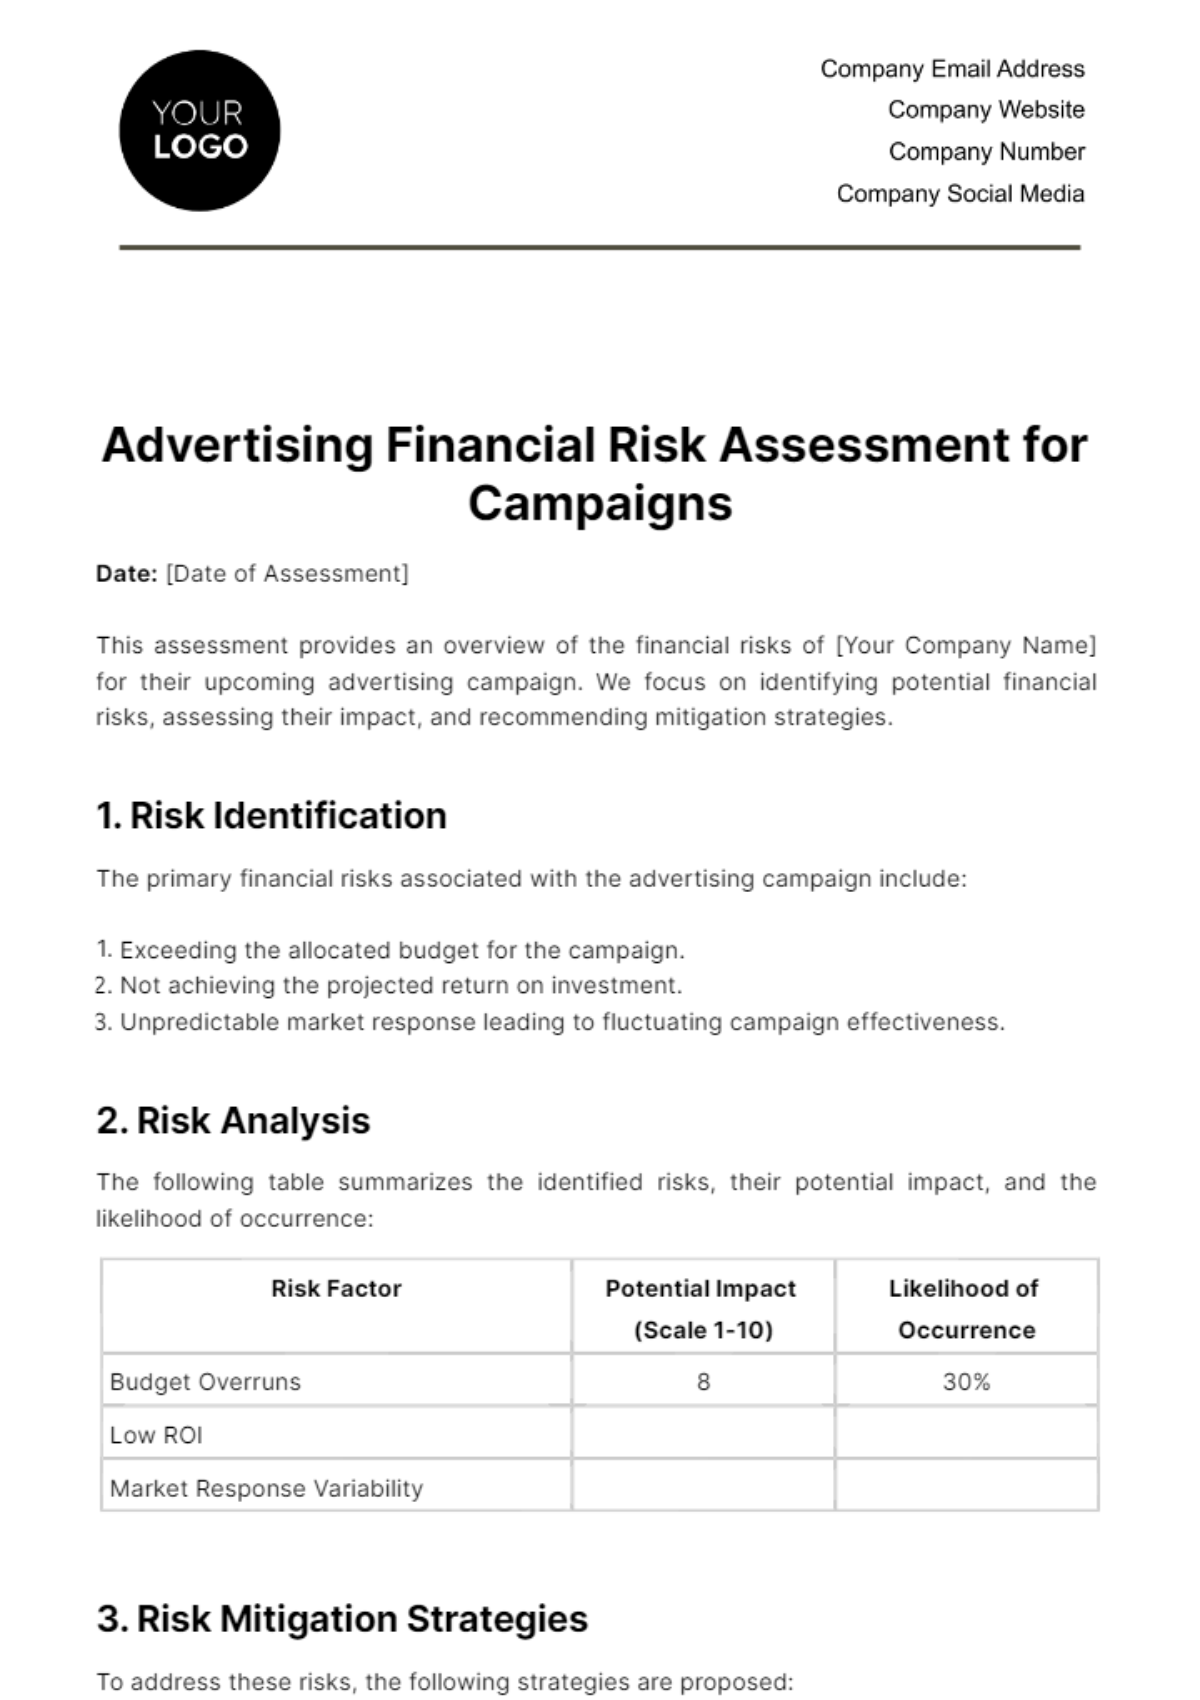 Free Advertising Financial Risk Assessment for Campaigns Template